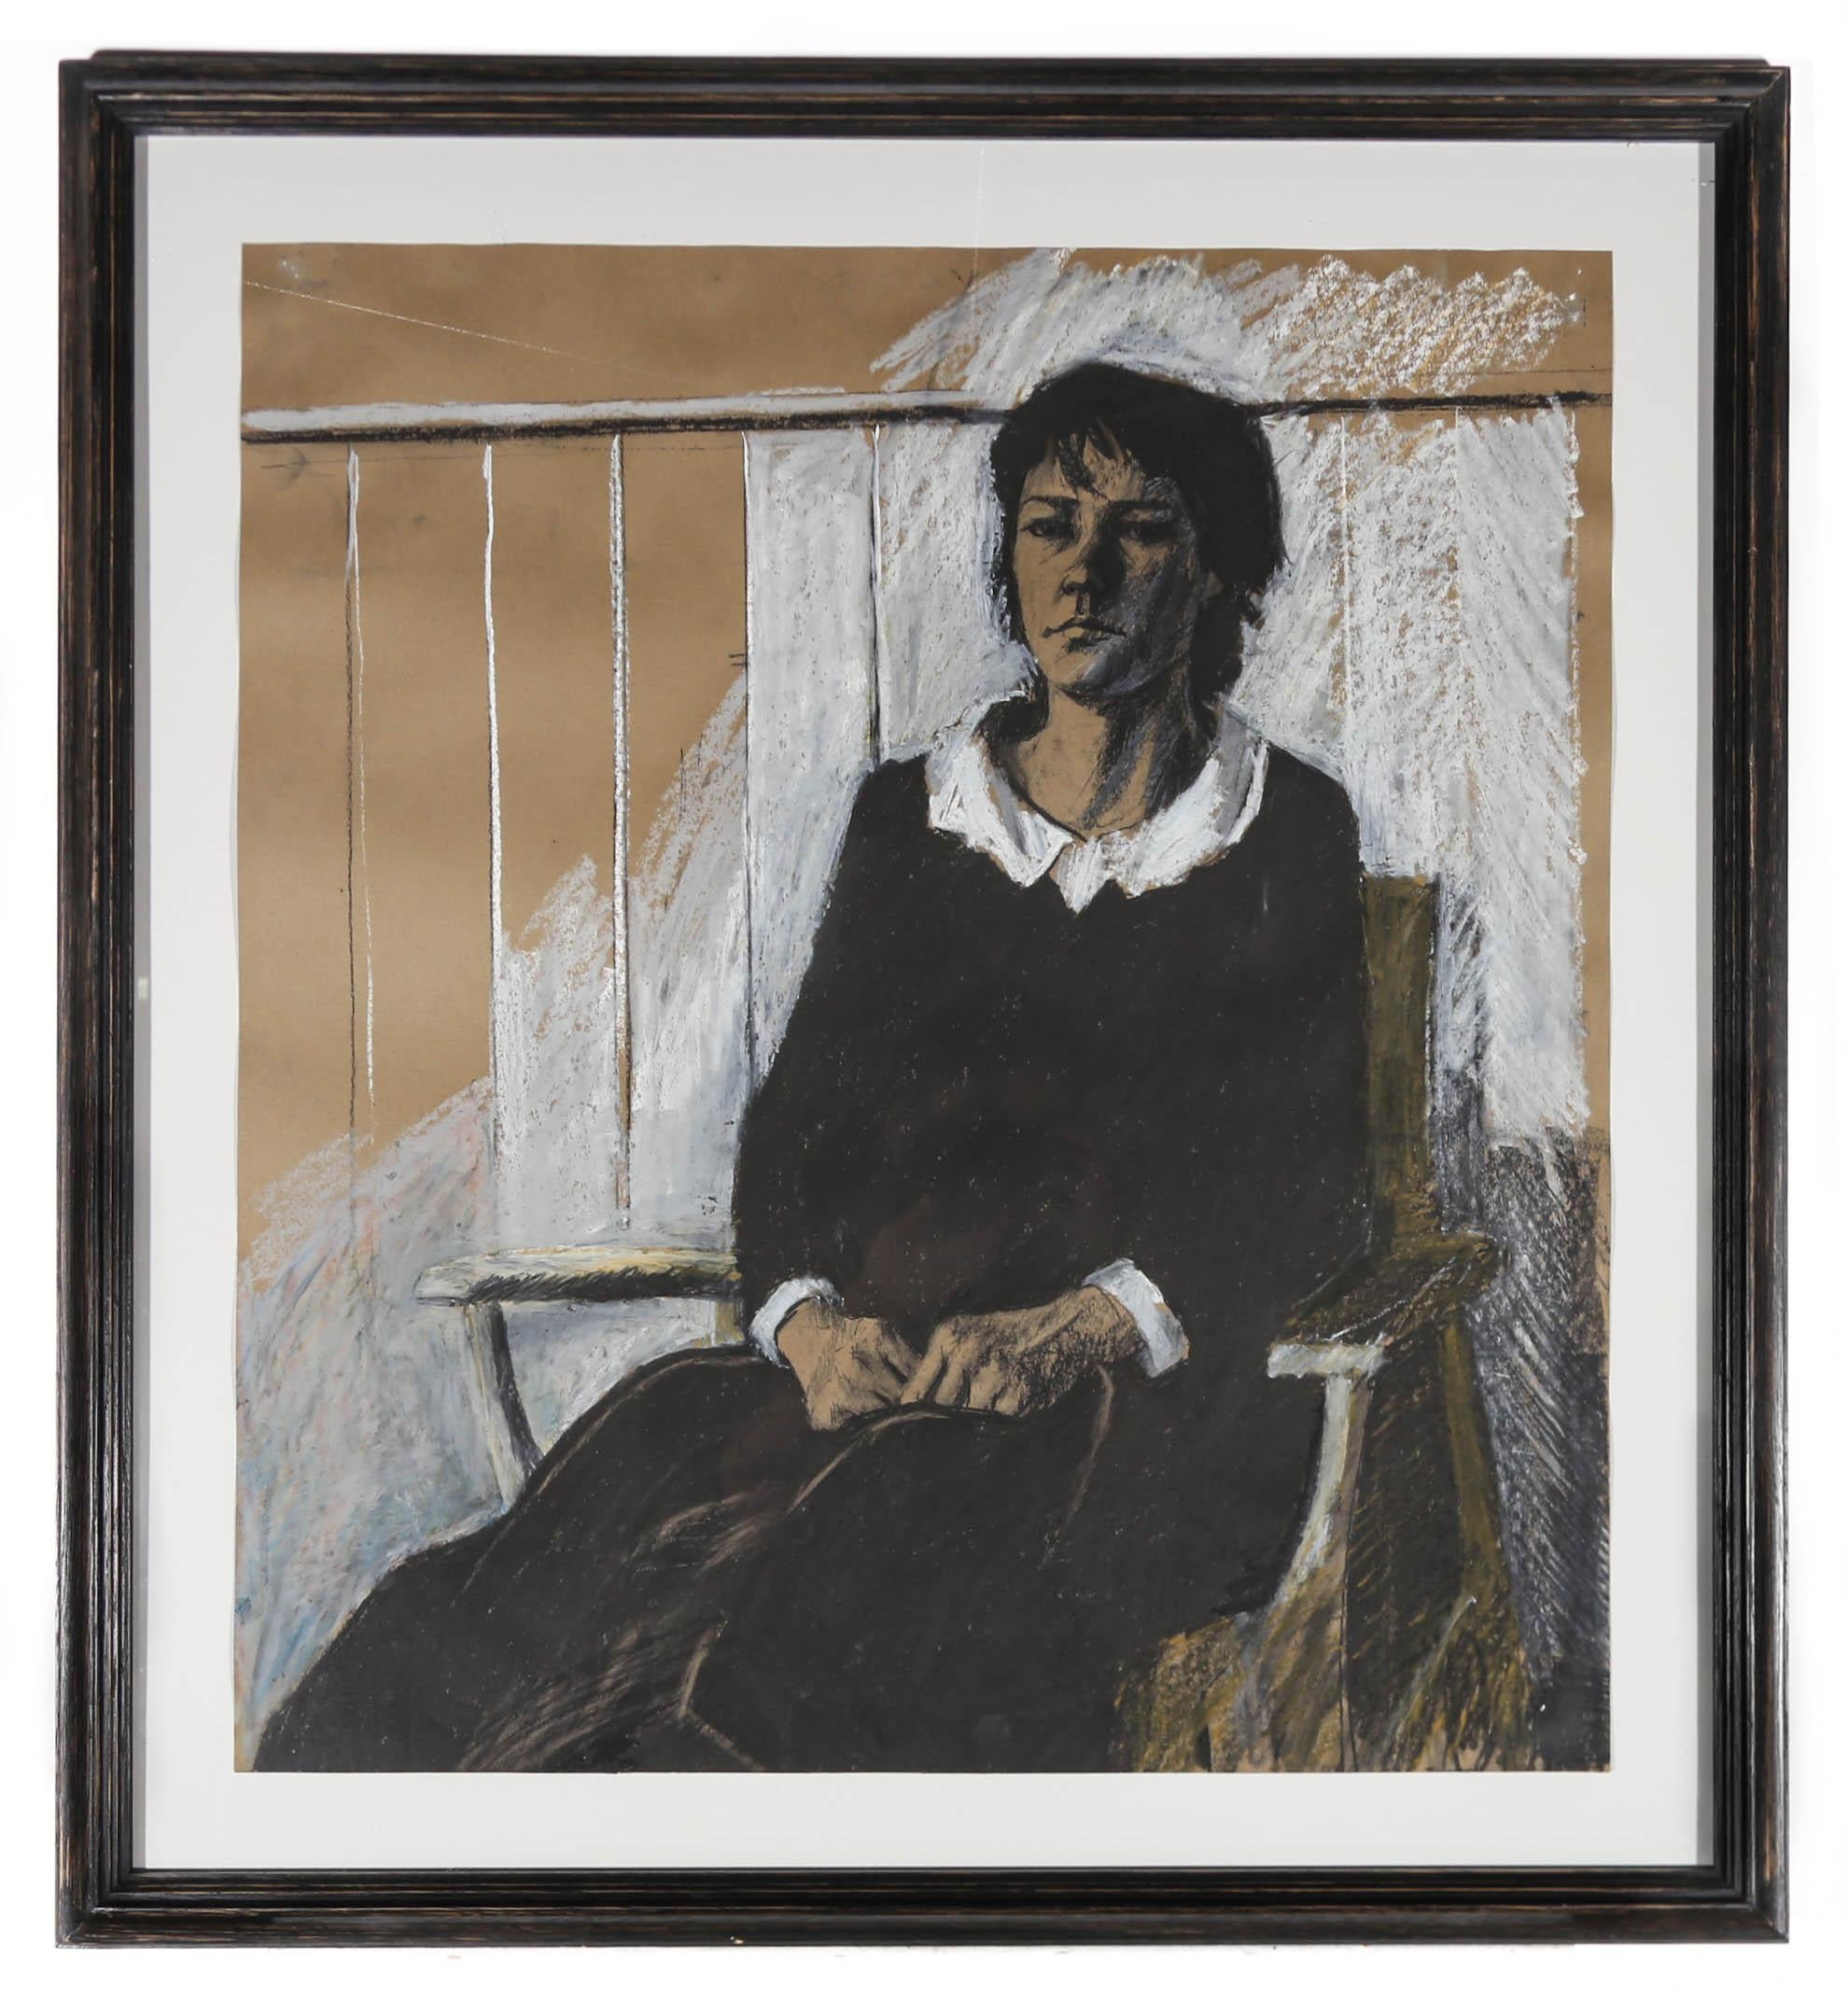 Captured in charcoal and chalk, this striking portrait depicts a woman seated in a chair wearing a black dress. The artist shows shadows drawing across the woman's face and she somberly gazes into the distance. The sketched background juxtaposes the